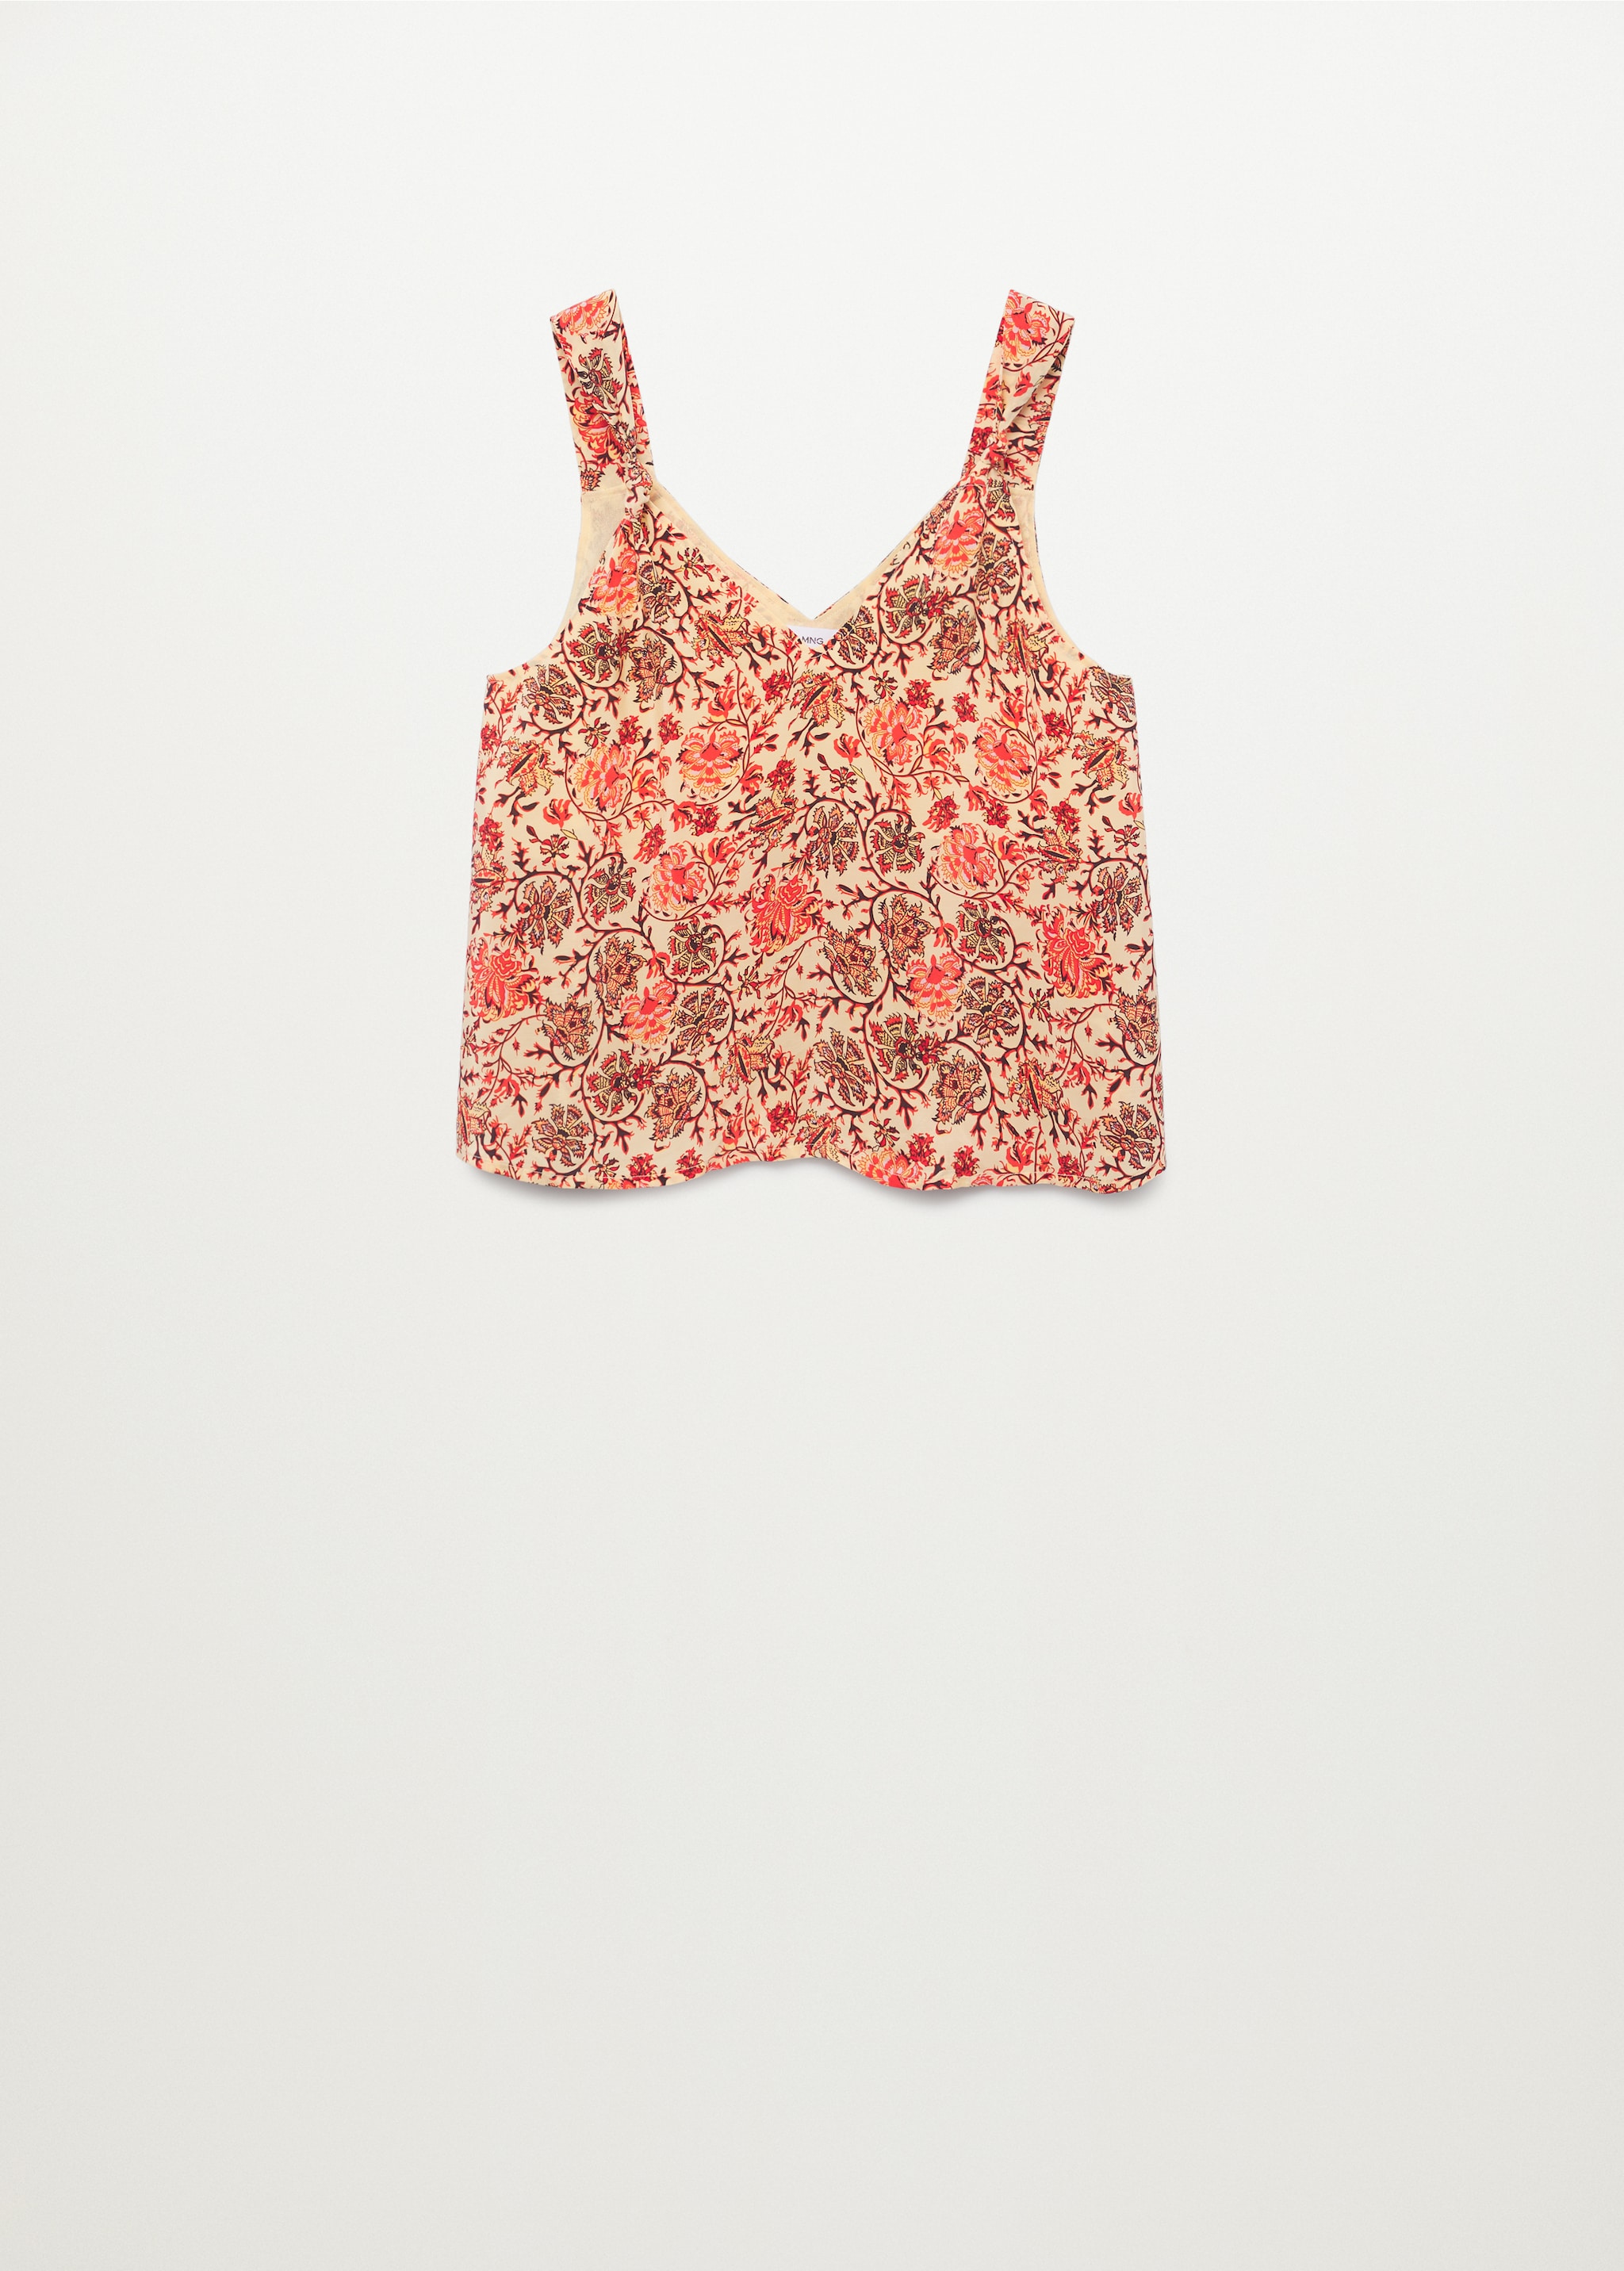 Printed strap top - Article without model